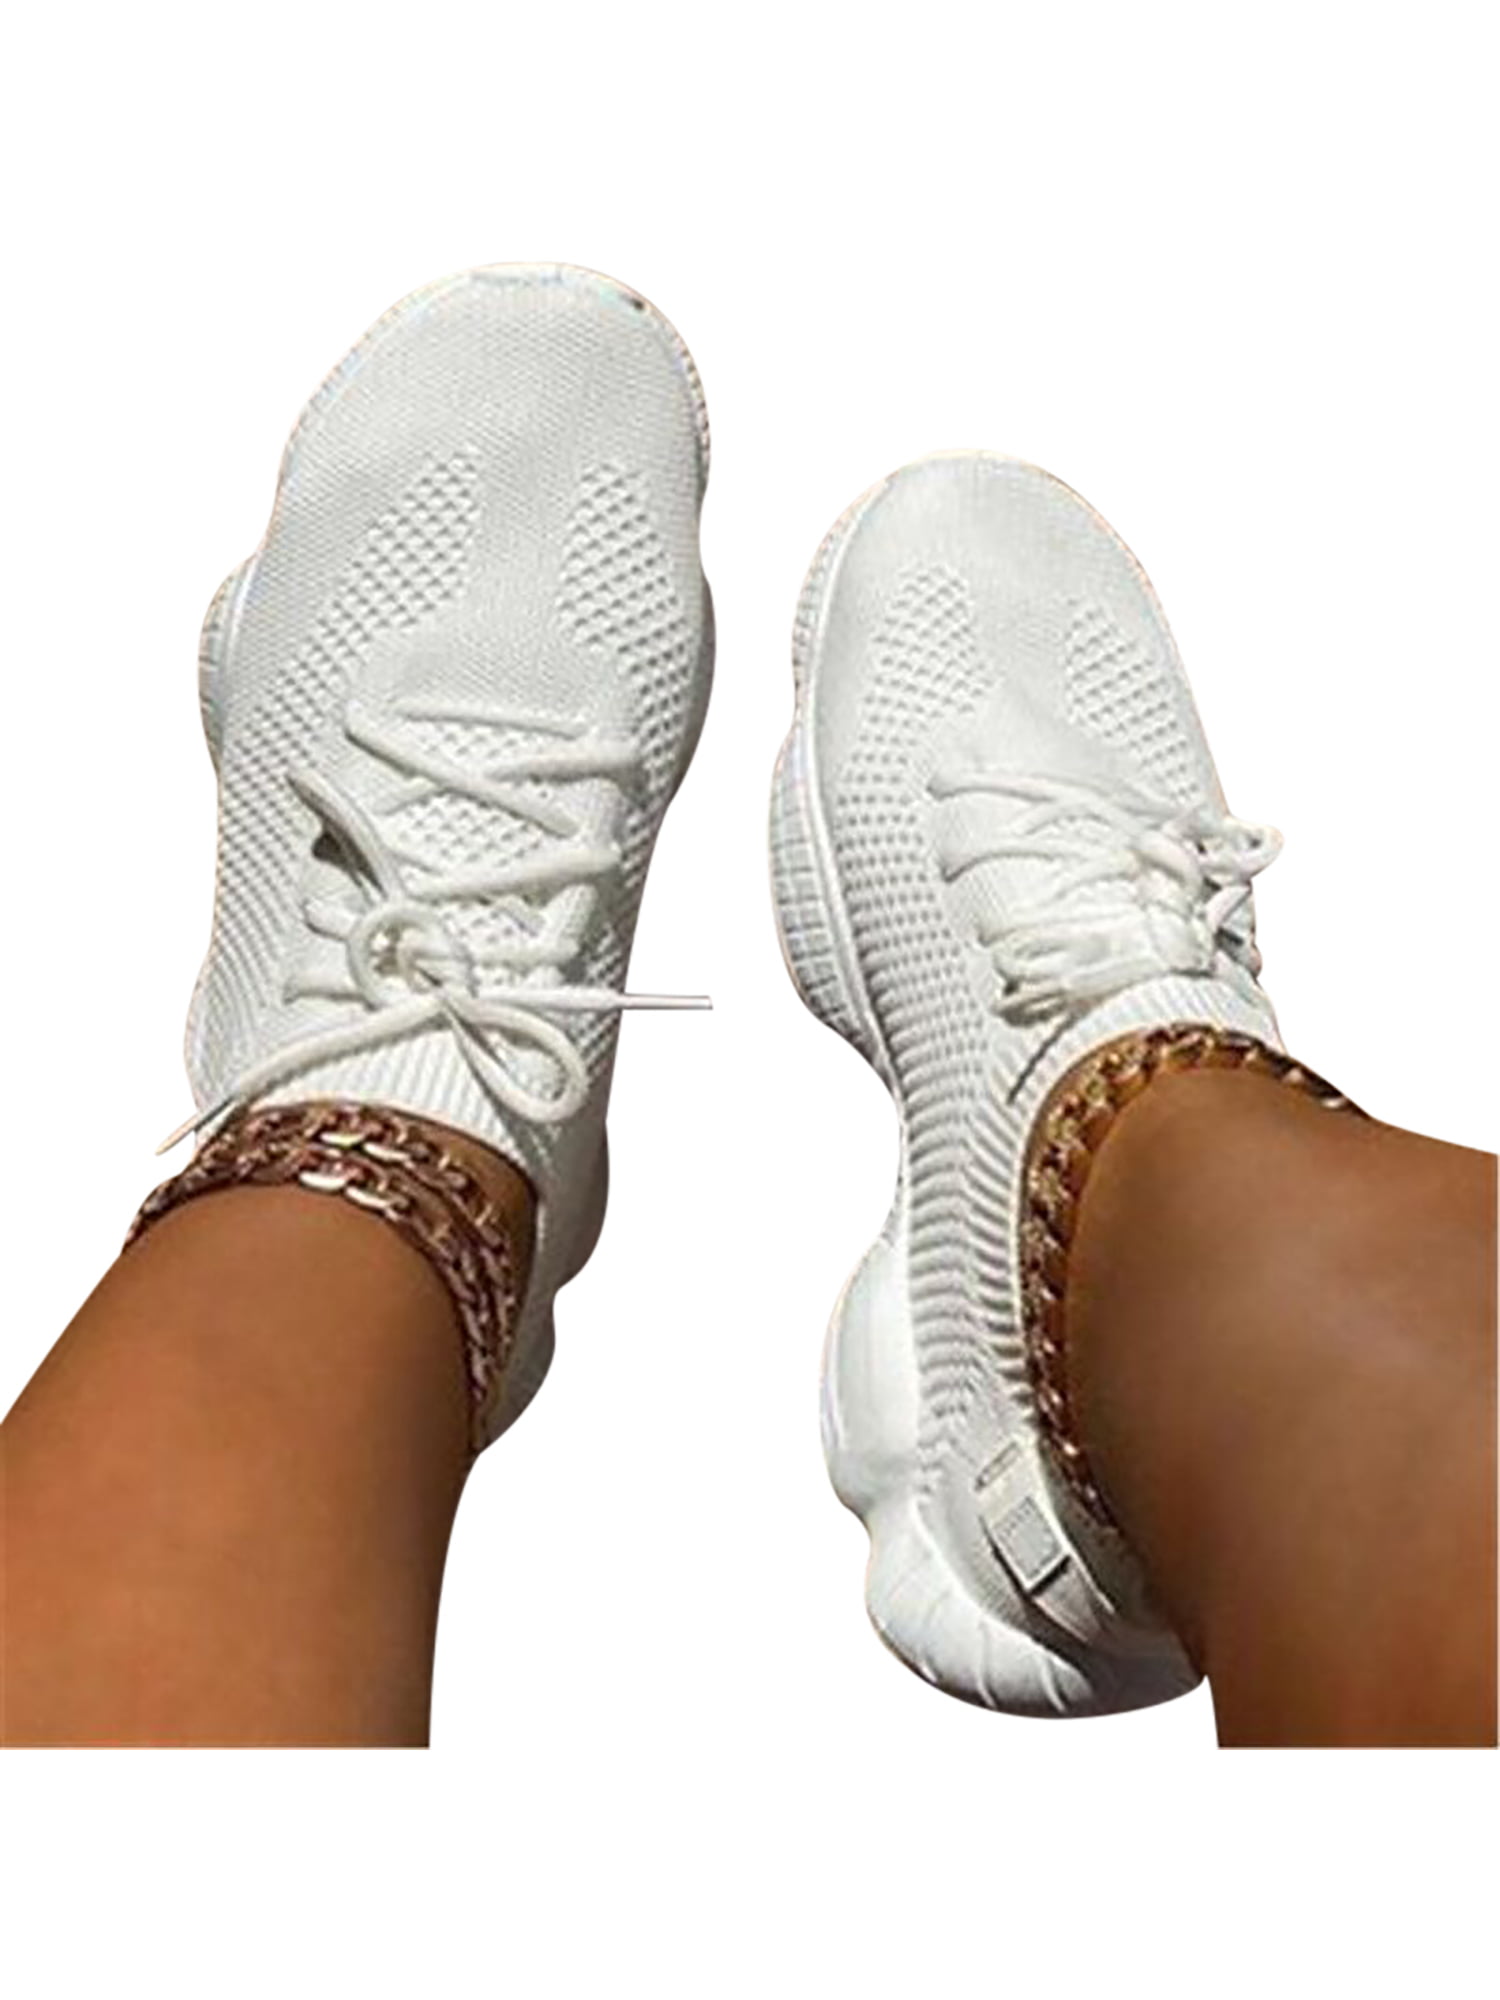 WOMENS Girls SNEAKERS Breathable MESH RUNNING WALKING CASUAL Iridescent SHOES 